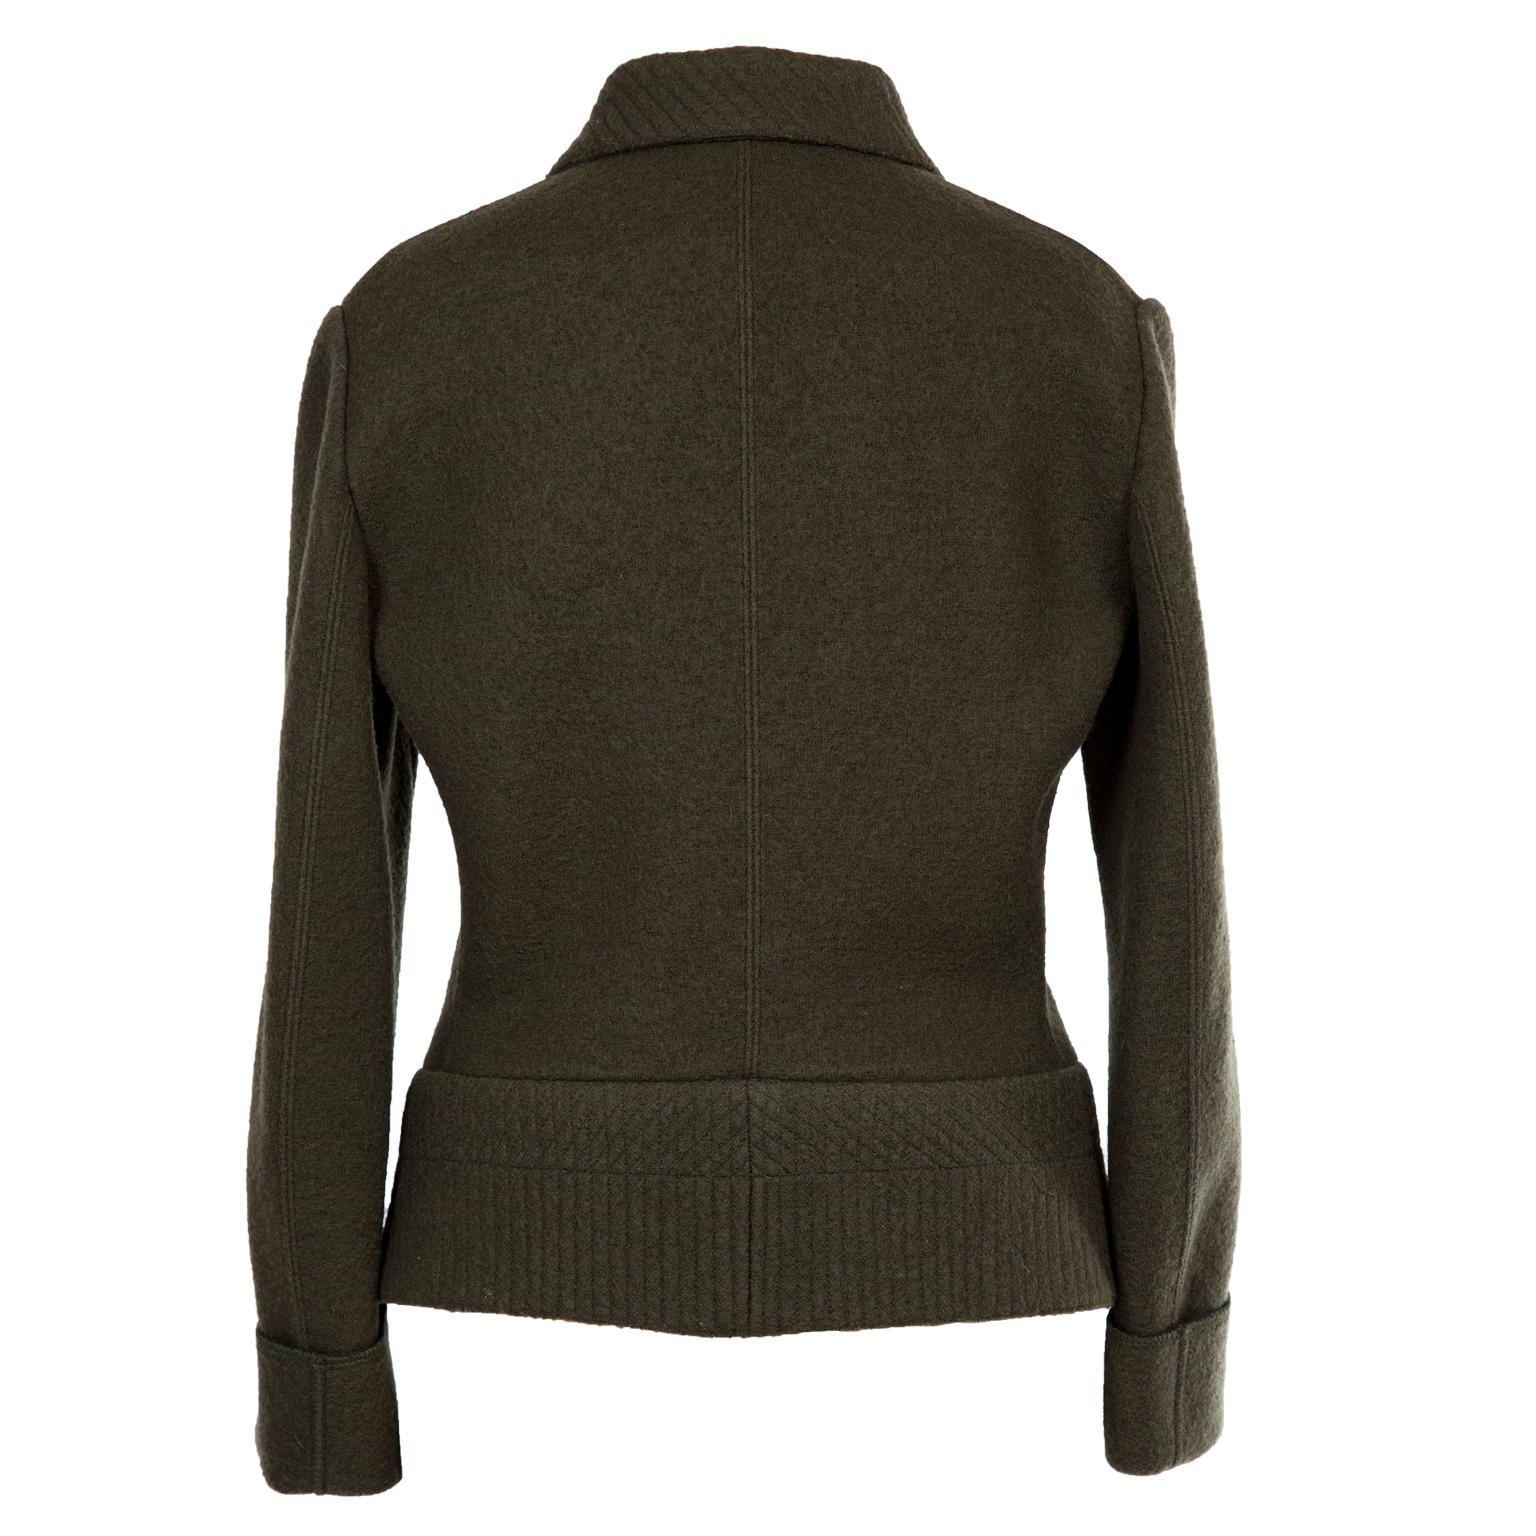 Azzedine Alaia deep khaki wool curved Jacket from 1980's.
With folded cuffs, center front with hidden hook closures, boxy yet iconic Alaia silhouette with stitch details on collar and double faced waist. Very beautifully constructed. 
Original